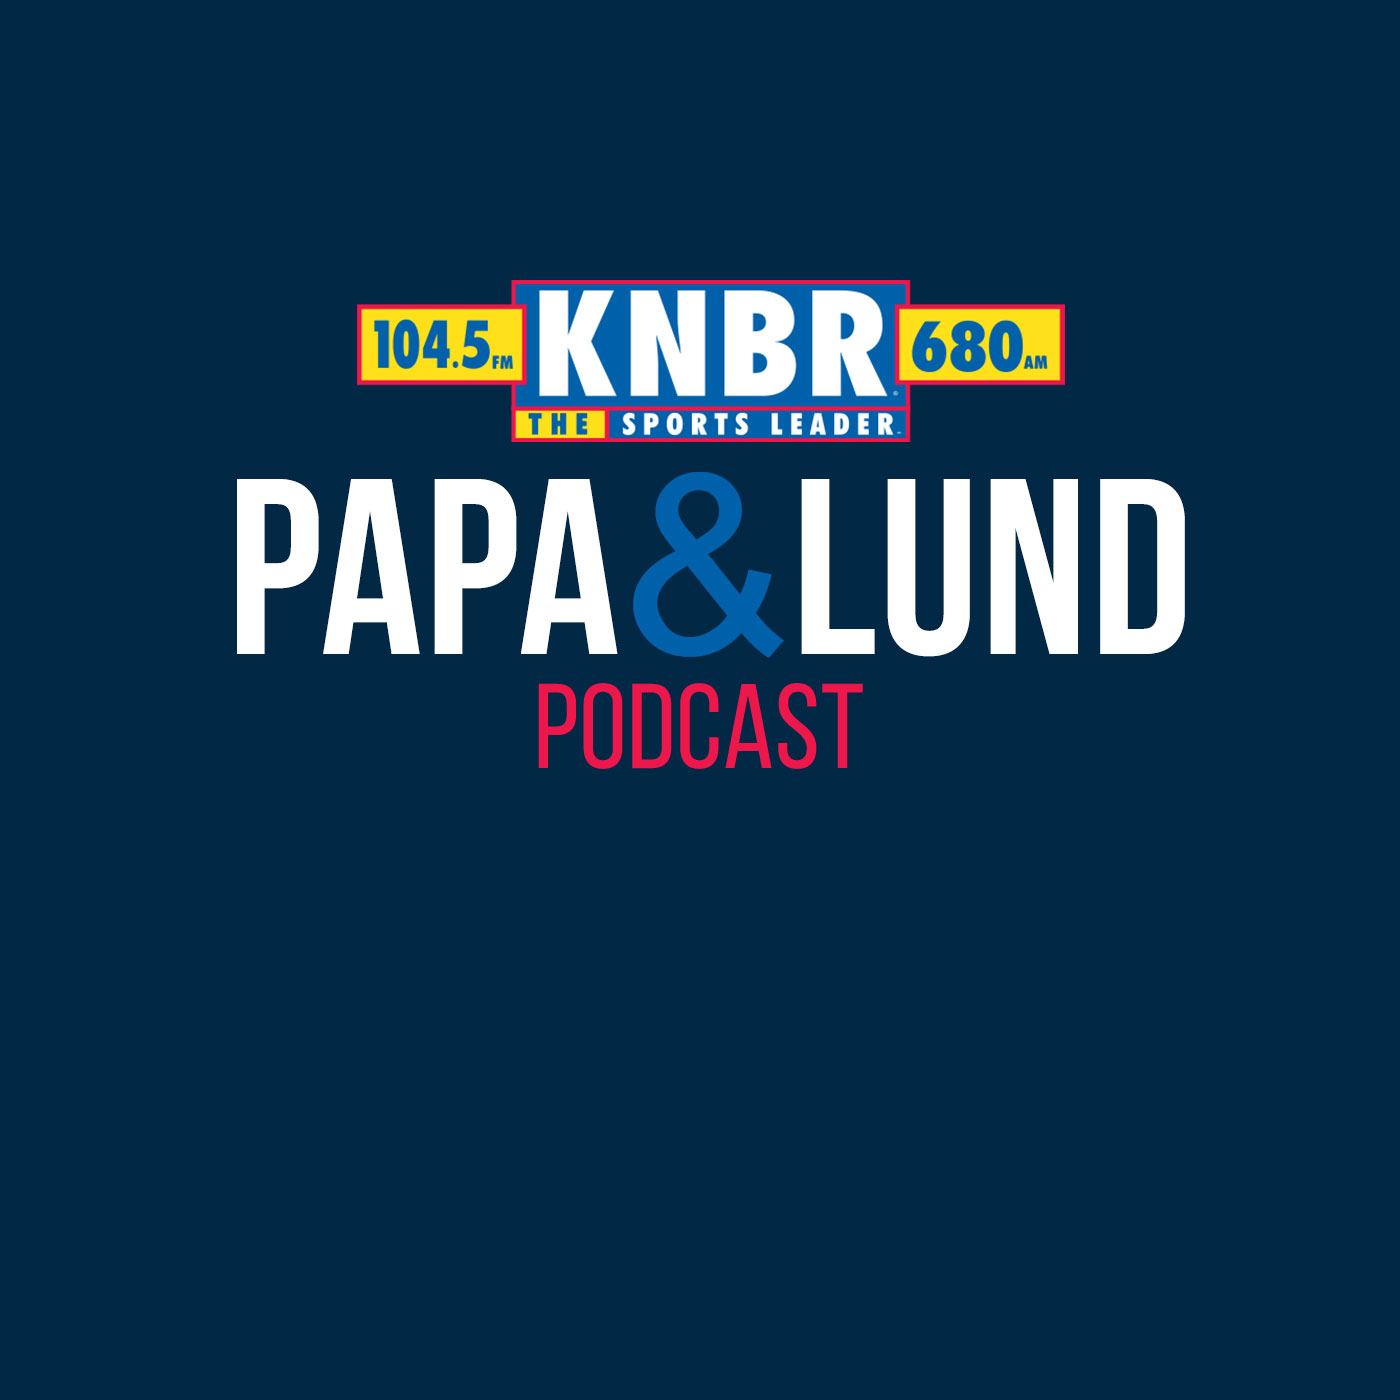 6-20 Marc Spears joins Papa & Lund to discuss the challenges that New Warriors GM Mike Dunleavy will have in his first offseason with the team including bringing back Draymond Green